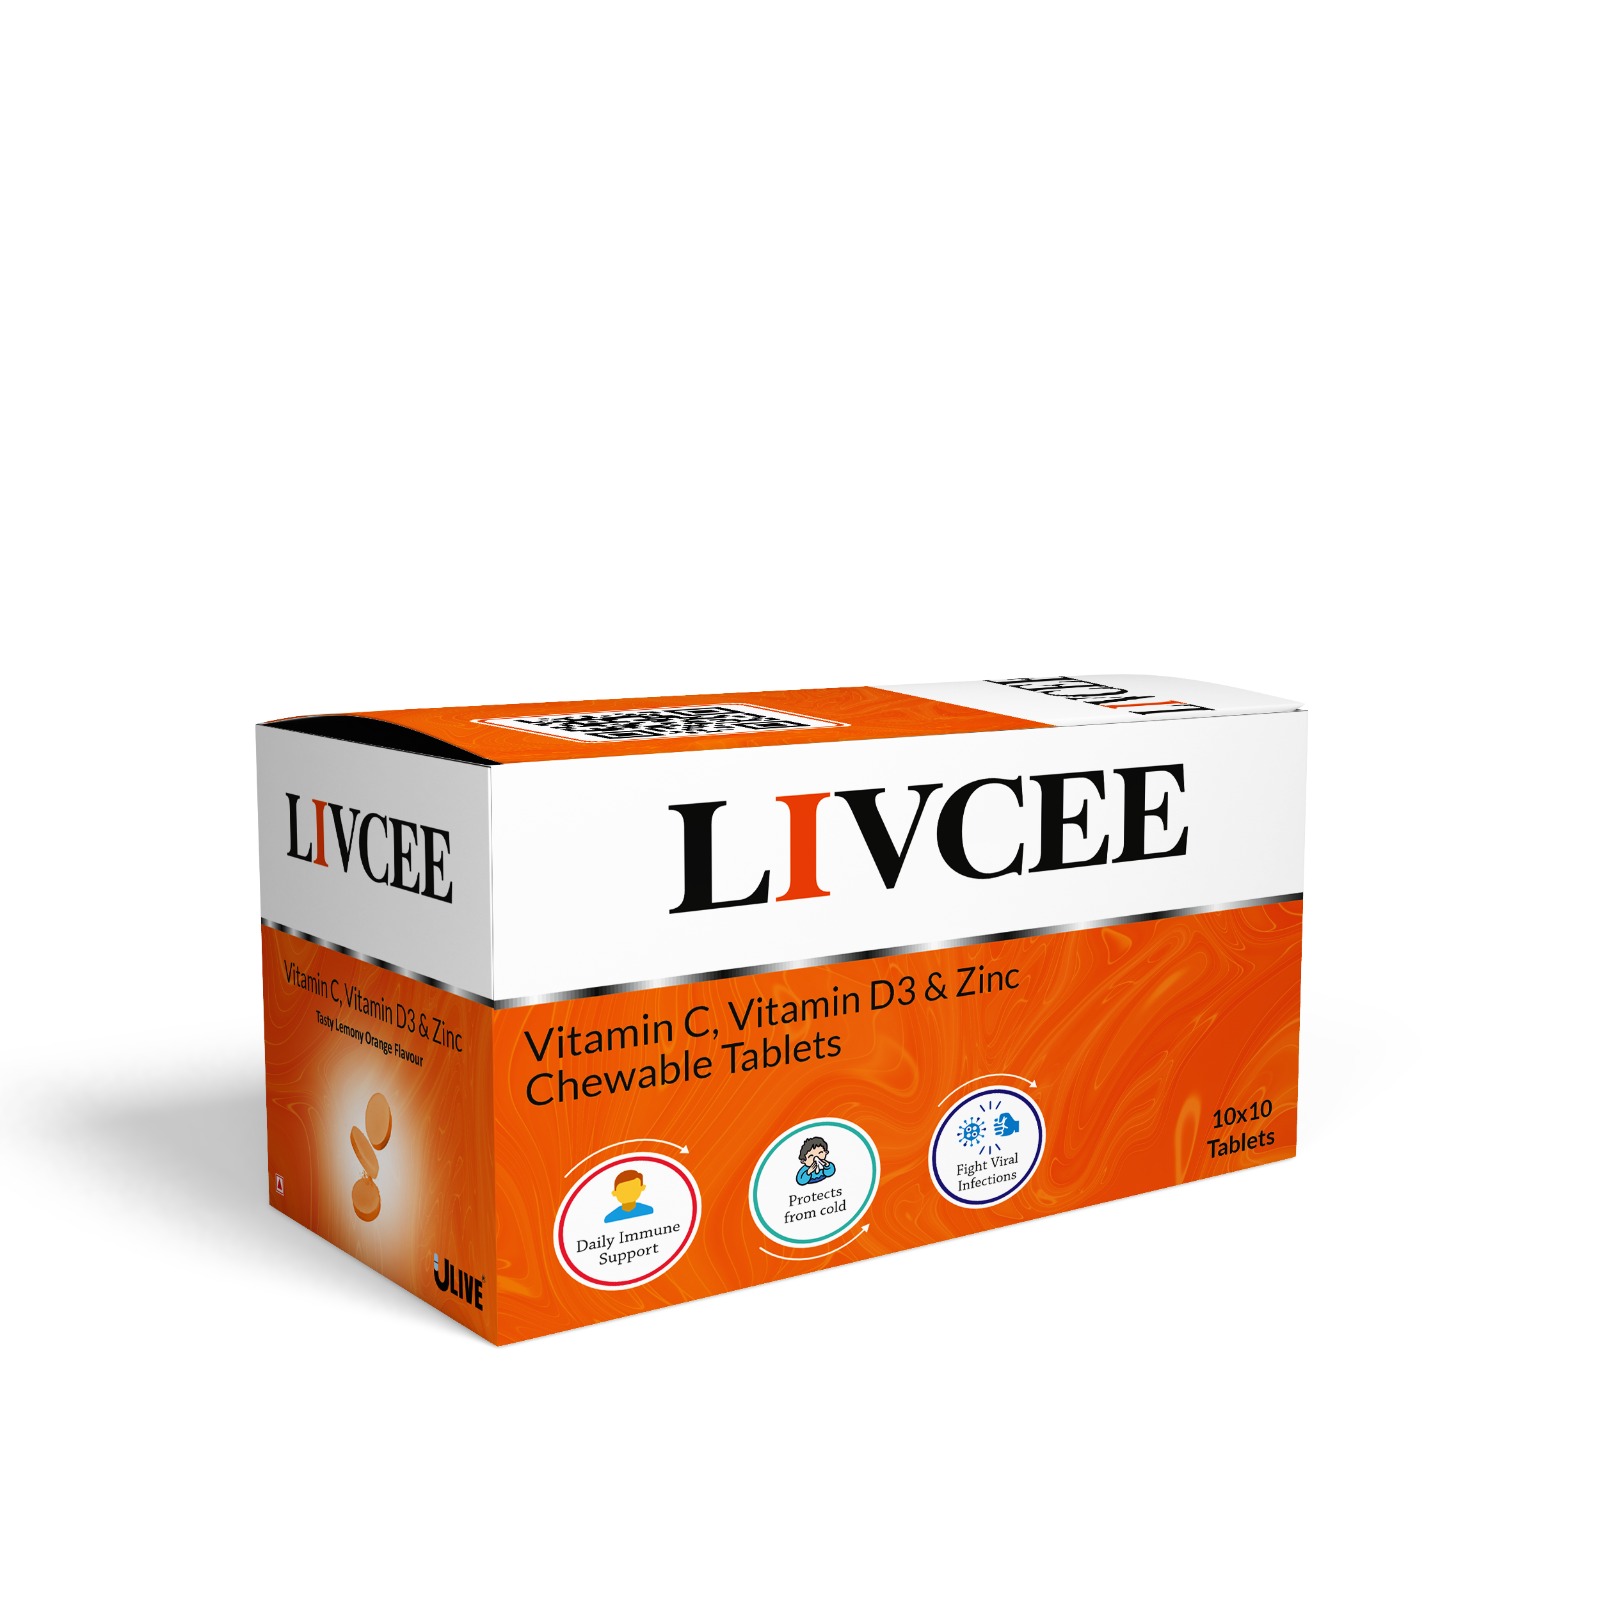 LIVCEE